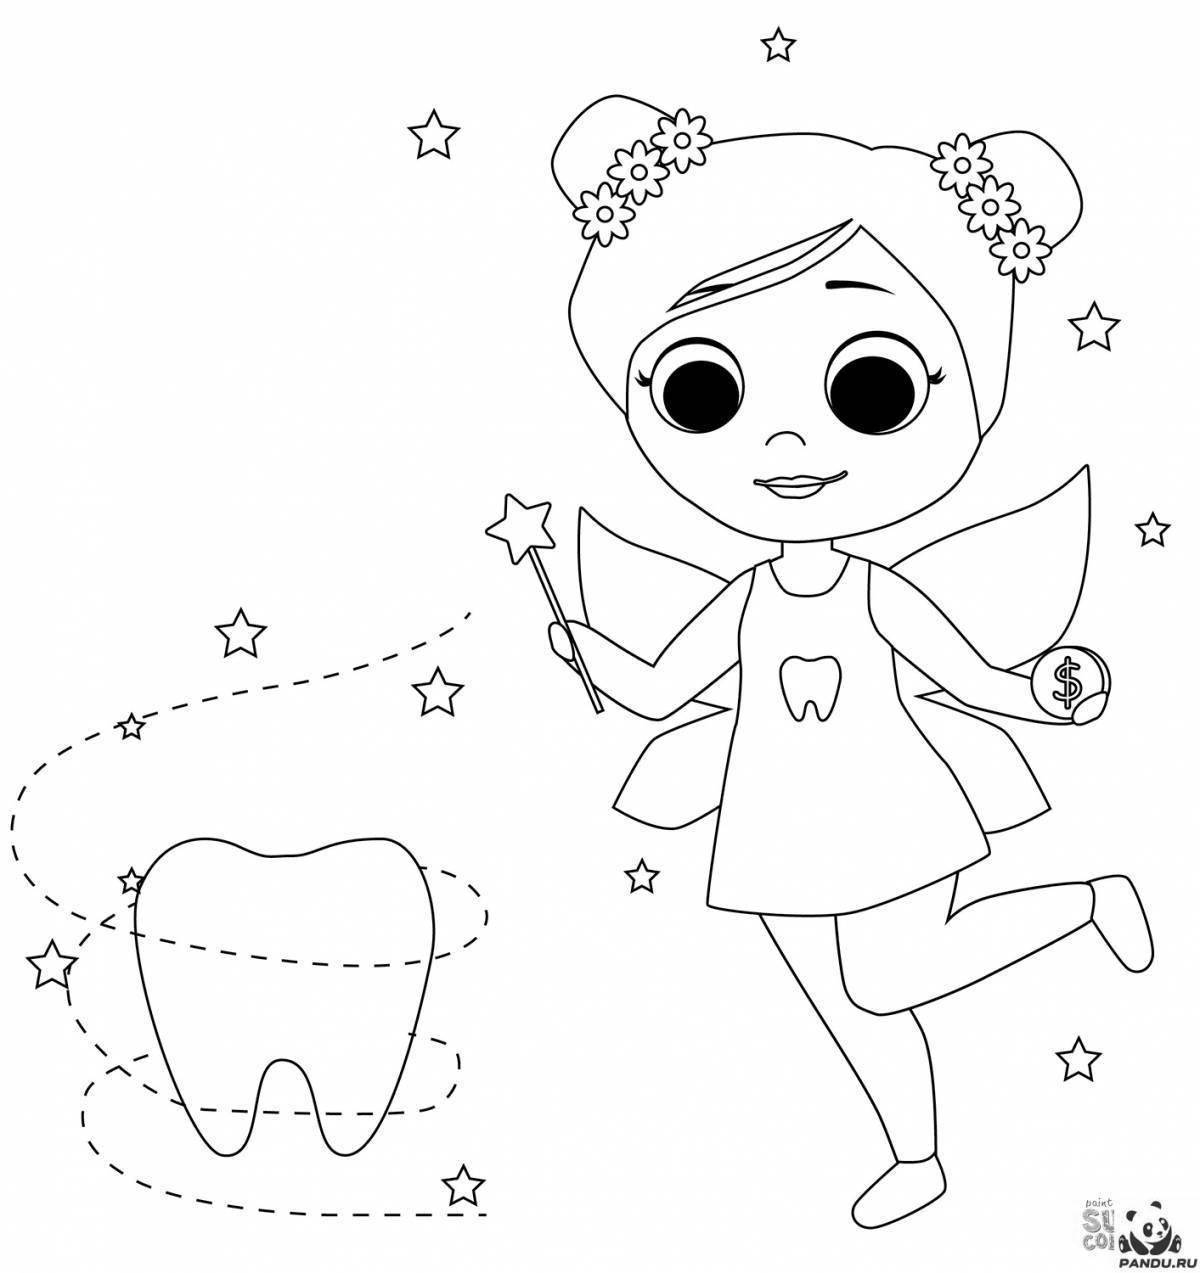 Fantastic tooth fairy coloring book